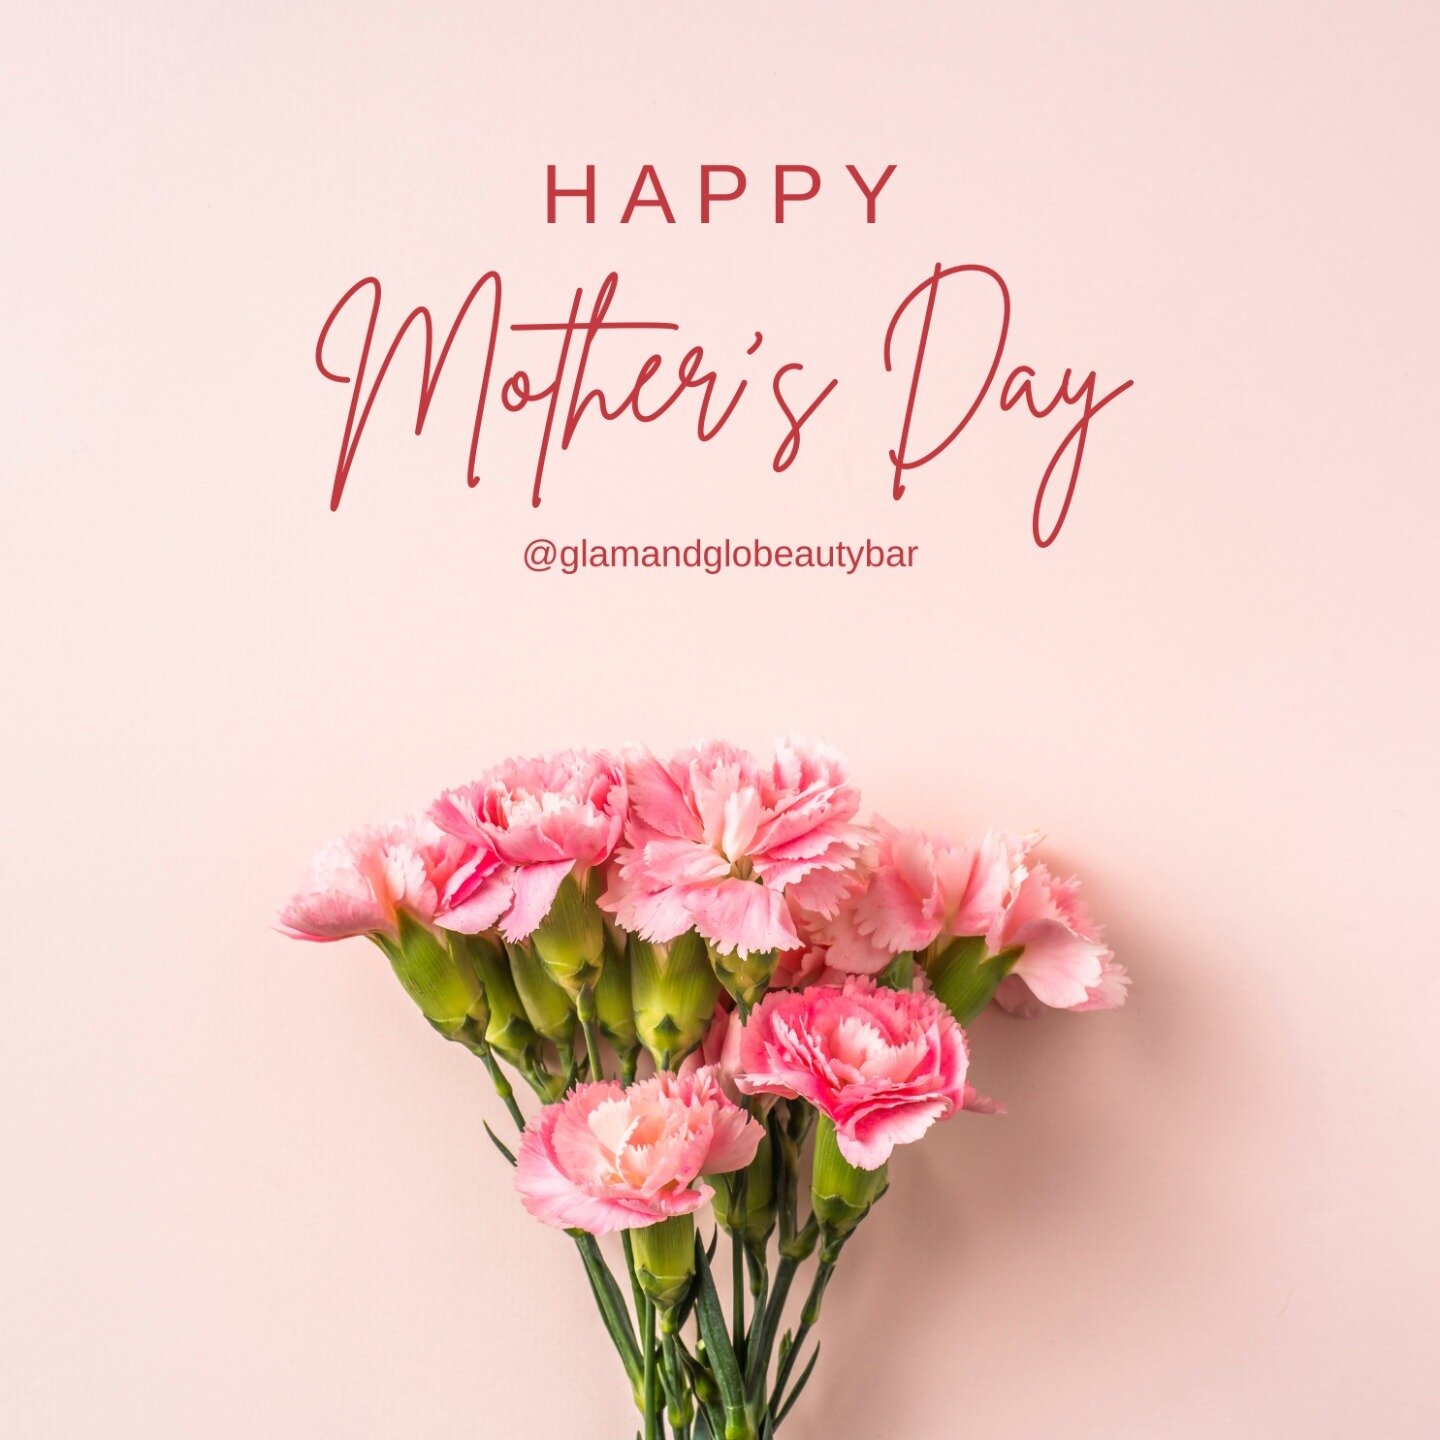 Happy Mother&rsquo;s Day! 🫶
.
.
#raleighesthetician #caryesthetician #lashes #lashliftandtint #carync #raleighnc #carylashes #carybrows #makeup #carymakeupartist #raleighmakeupartist #raleighlashes #spraytan #caryspraytan #raleighspraytan #facial #v